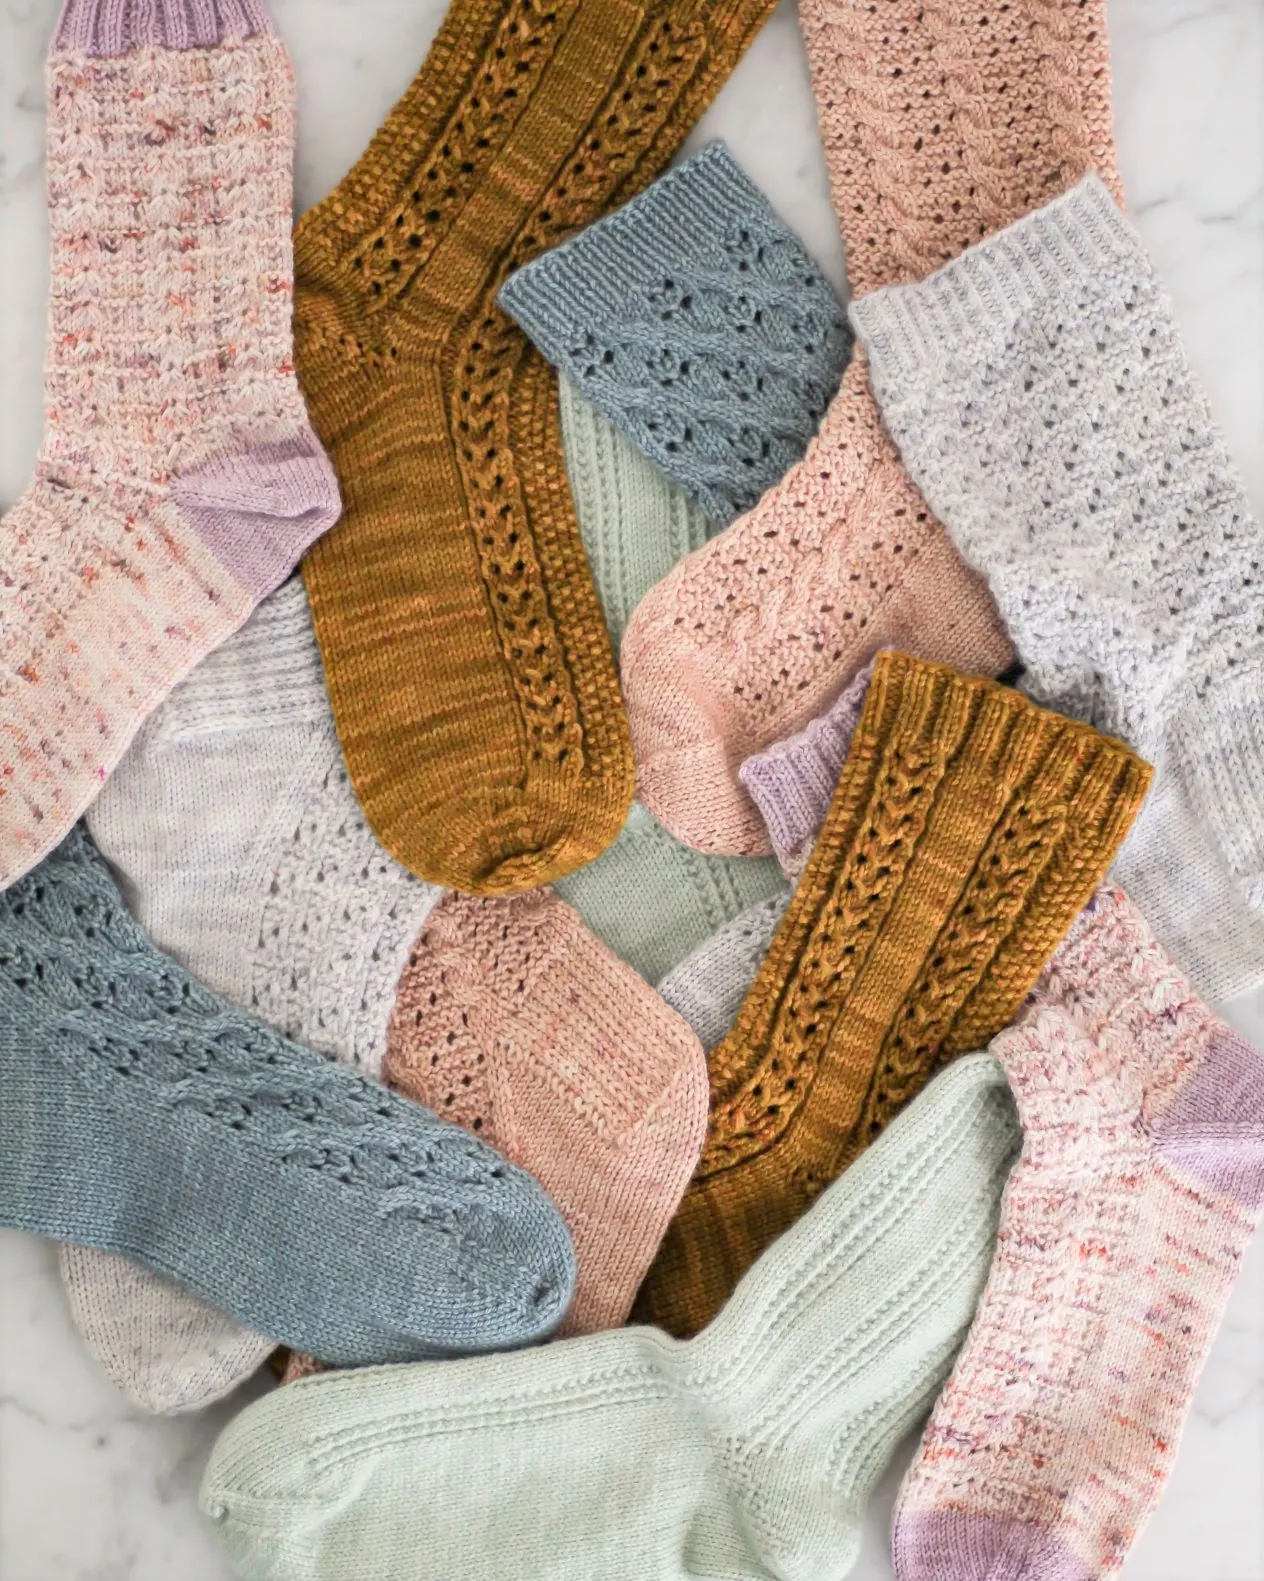 A Crocheter's First Experience Knitting Socks + My tips and tricks! -  Stitchberry